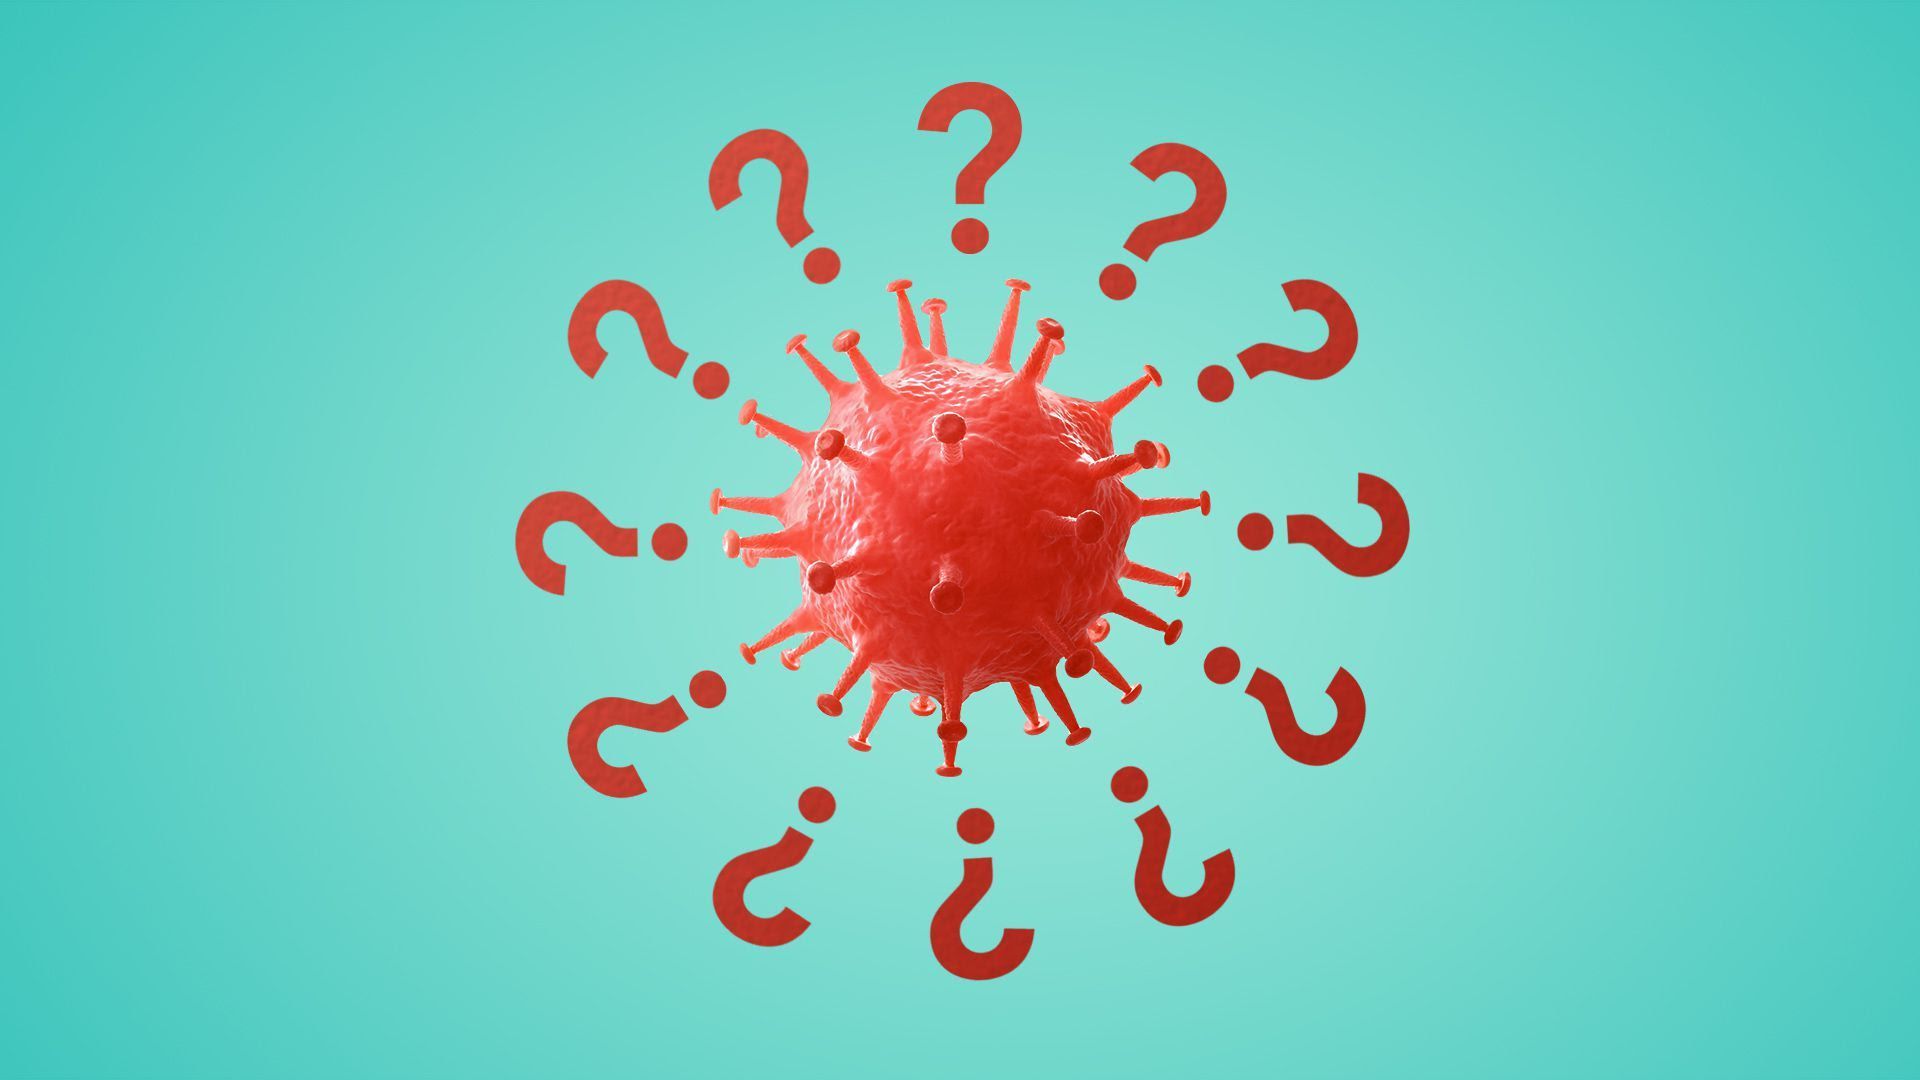 Illustration of virus cell with question marks around it